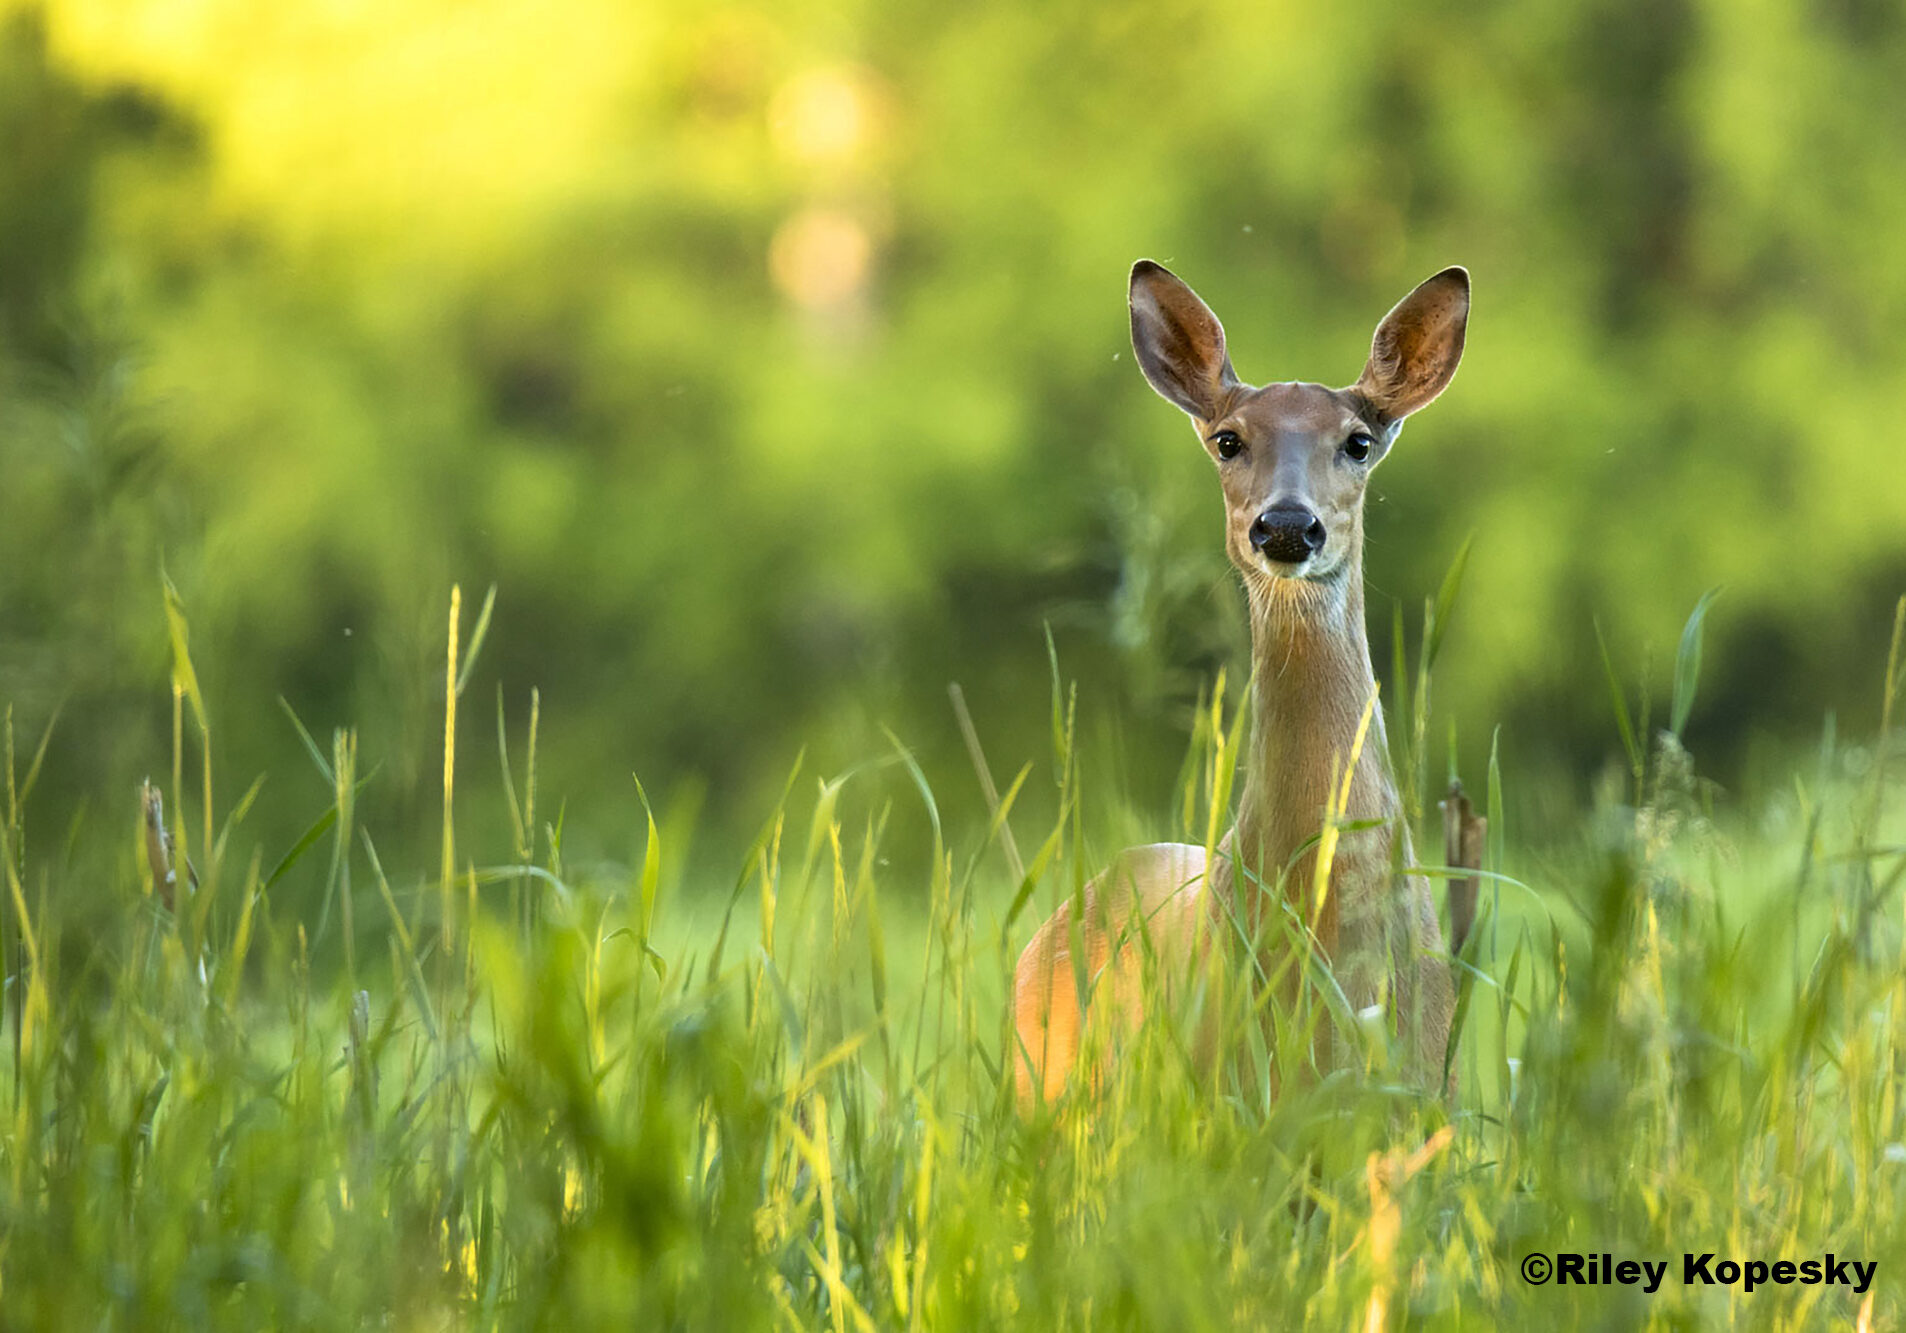 A doe looks at the camera in a field of tall grass